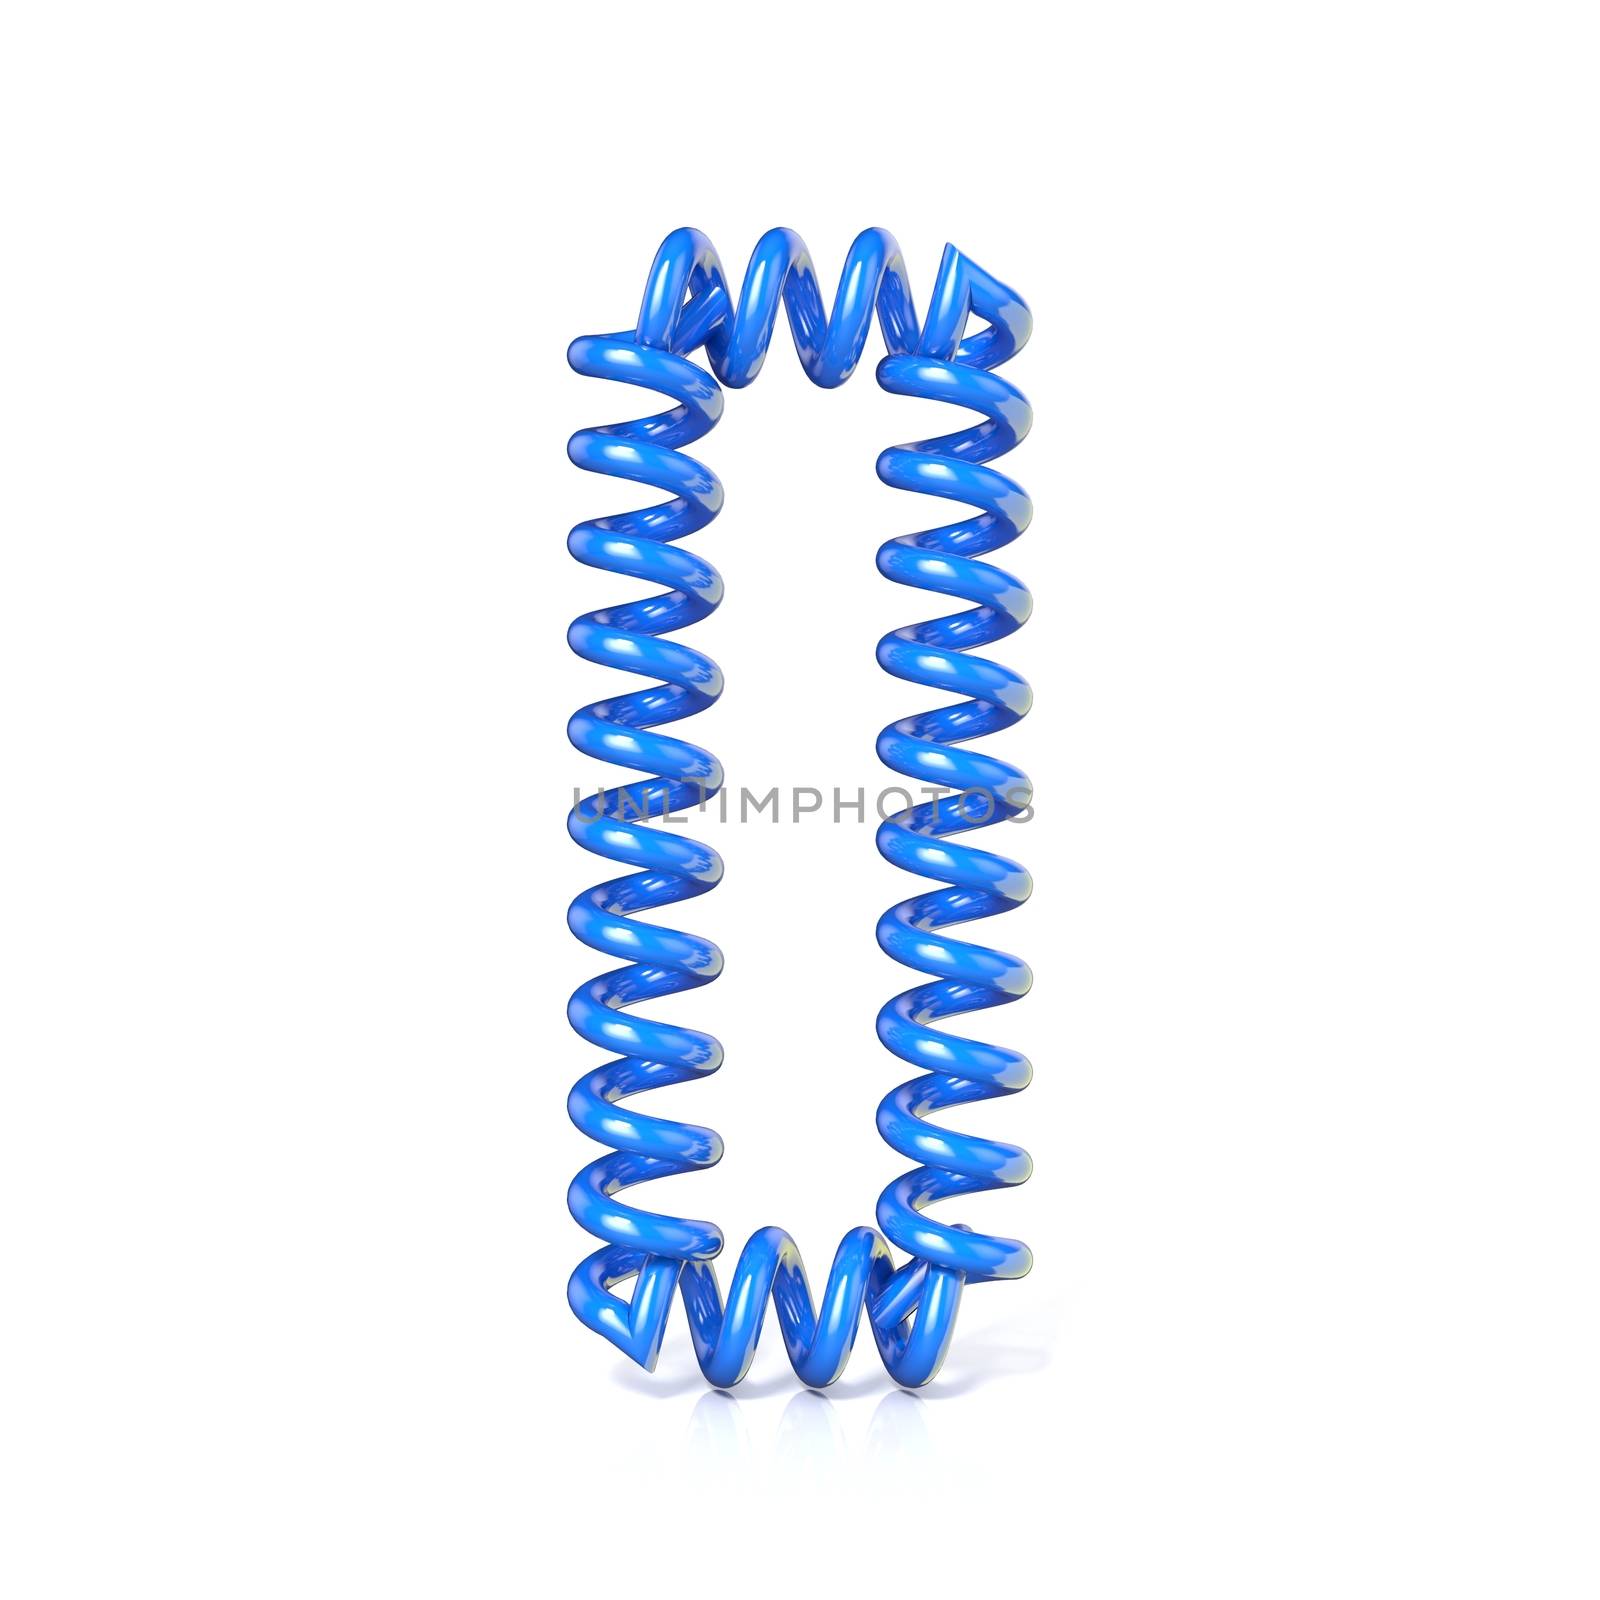 Spring, spiral cable font collection letter - I. 3D render illustration, isolated on white background